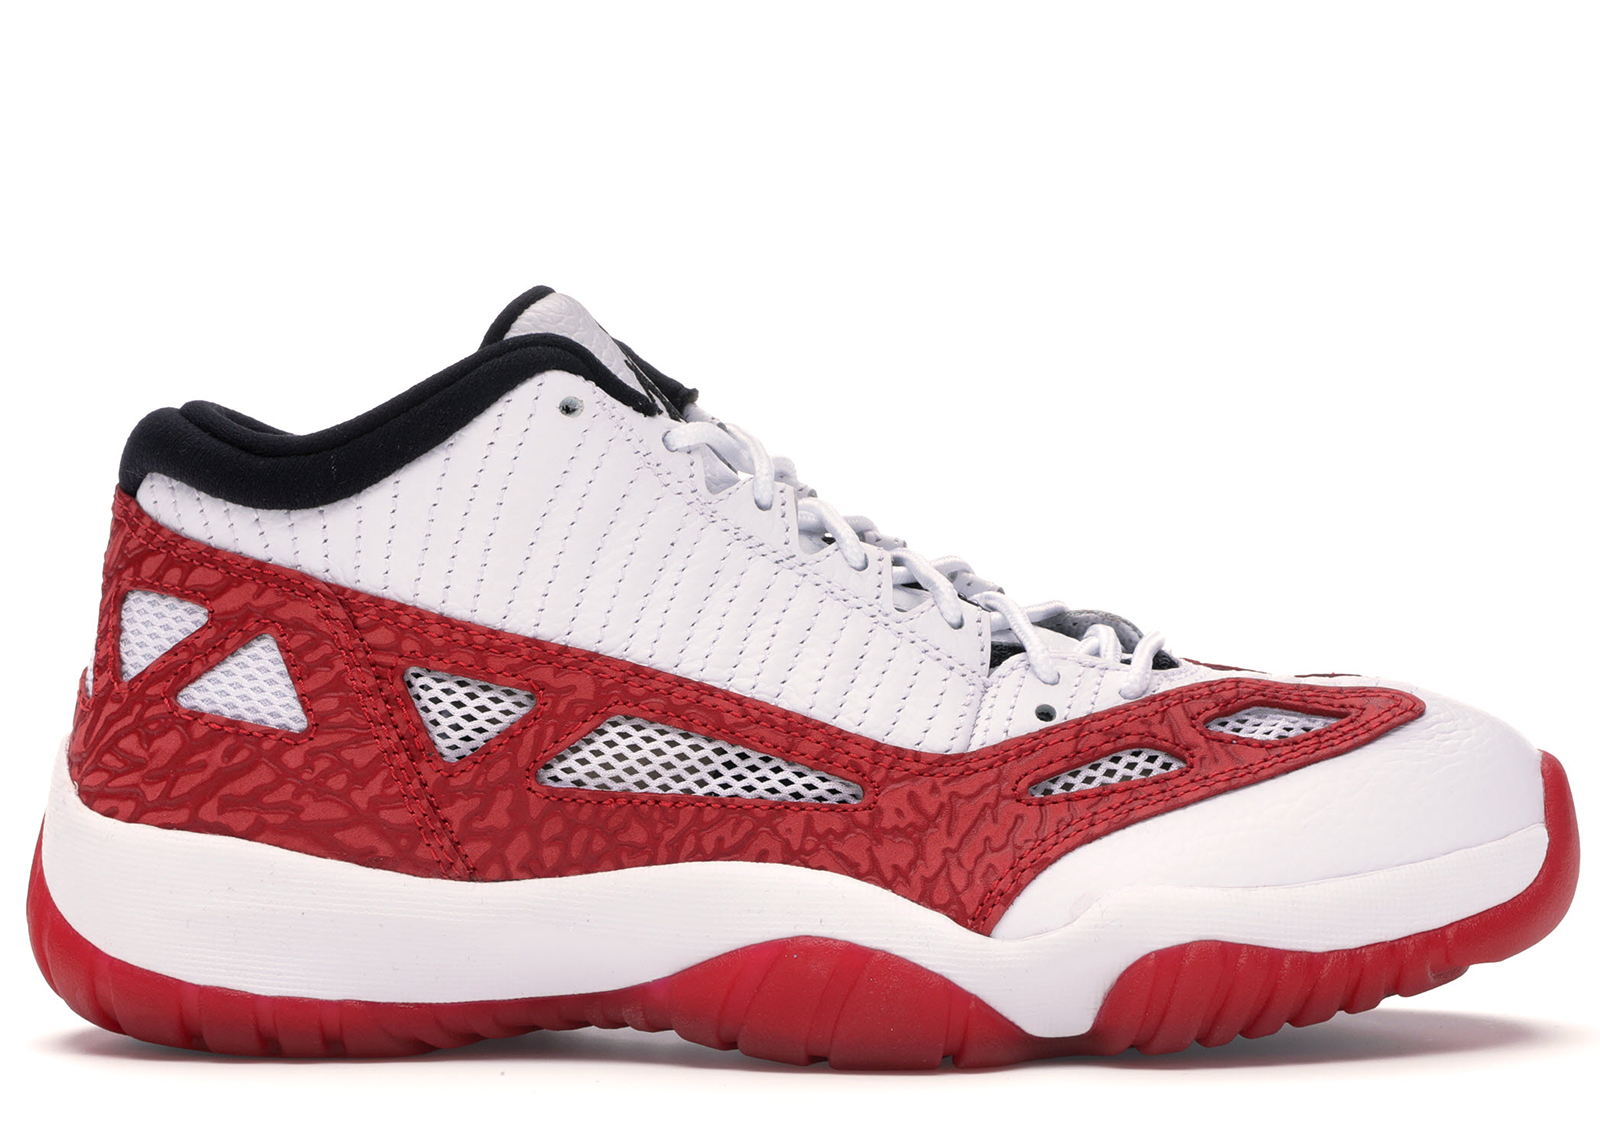 jordan 11 red and white low